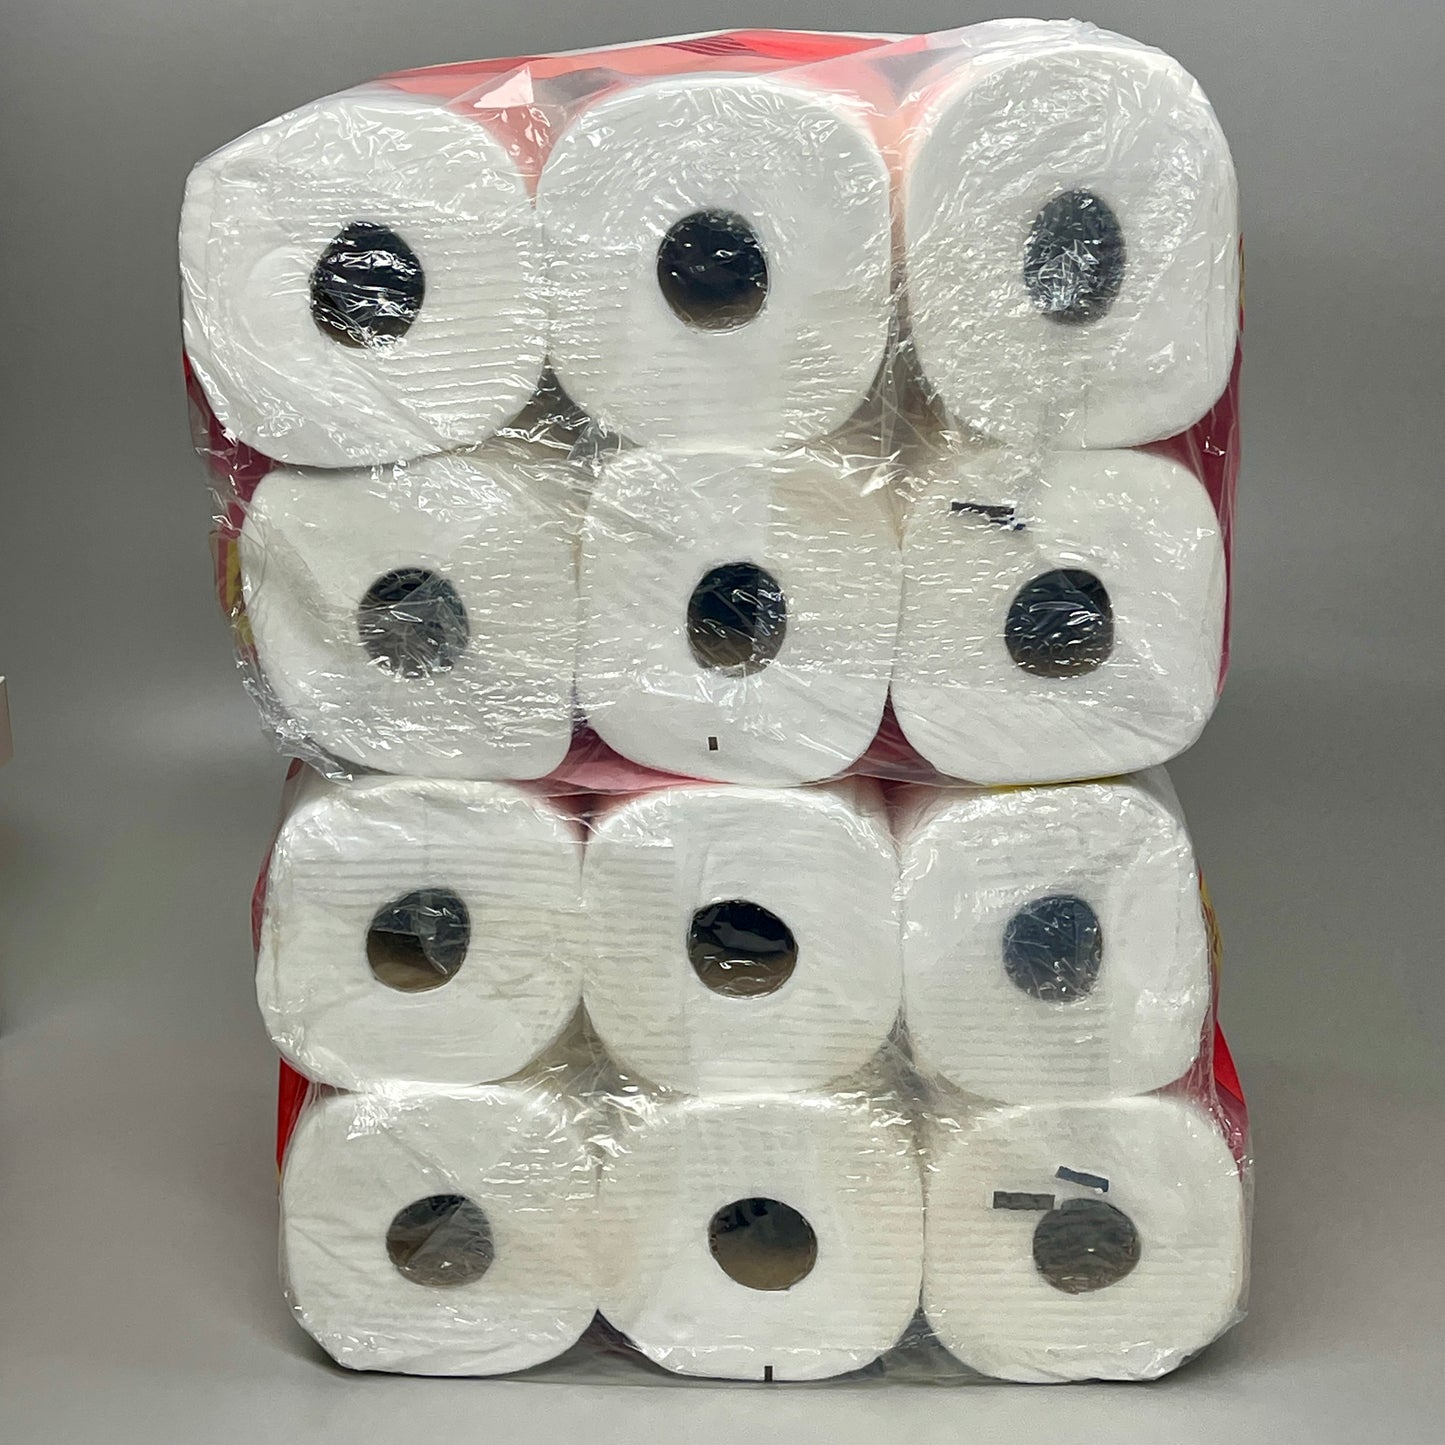 UP & UP (TARGET) 36 ROLLS! 2-Ply Premium Ultra Strong Bathroom Tissue –  PayWut